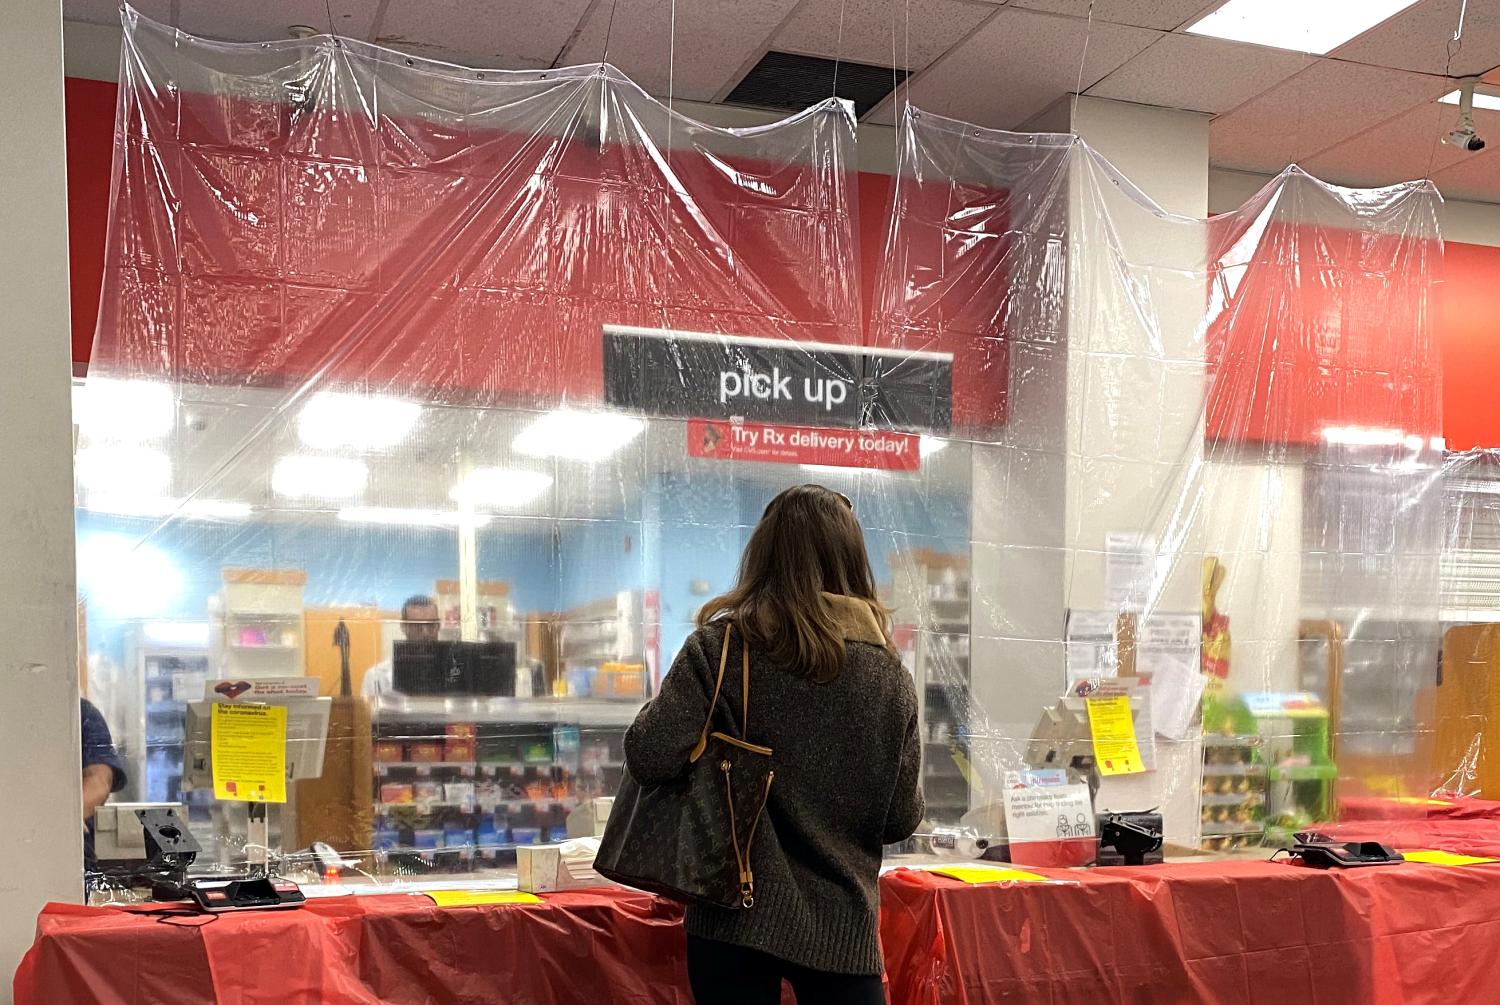 A woman waits behind a sheet of protective plastic at the pharmacist's counter at a CVS Pharmacy in Manhattan during the outbreak of the coronavirus disease (COVID-19) in New York City, New York, U.S., March 27, 2020. REUTERS/Mike Segar